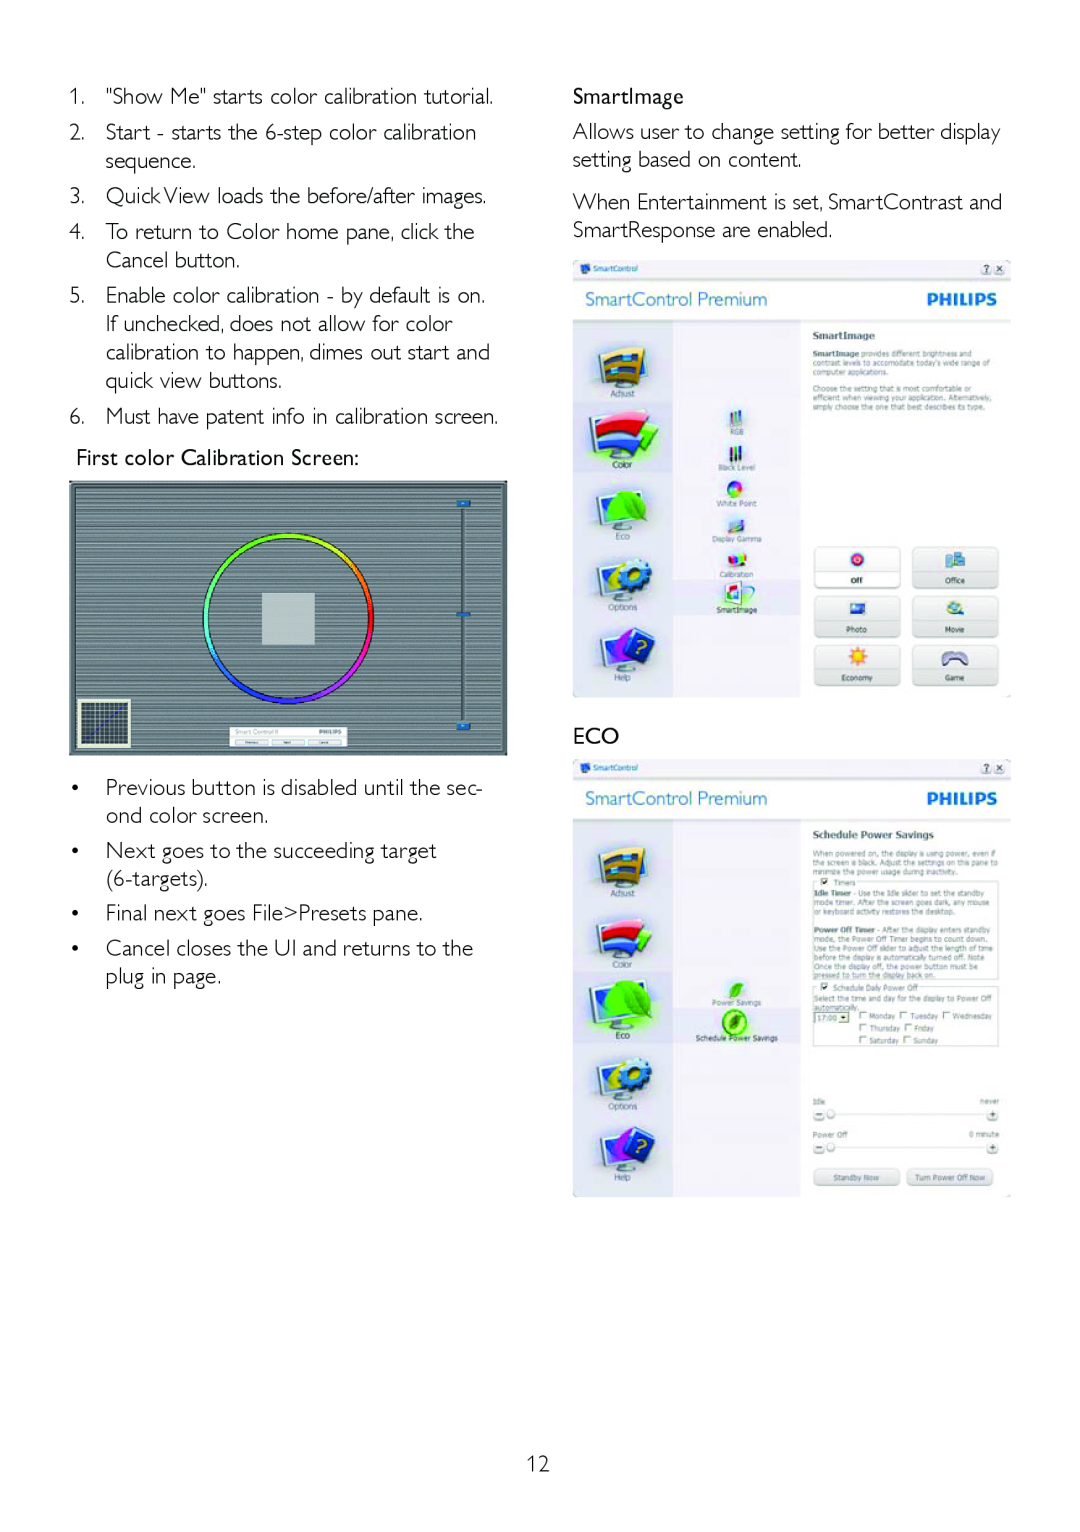 Philips 229CL2 user manual Show Me starts color calibration tutorial 